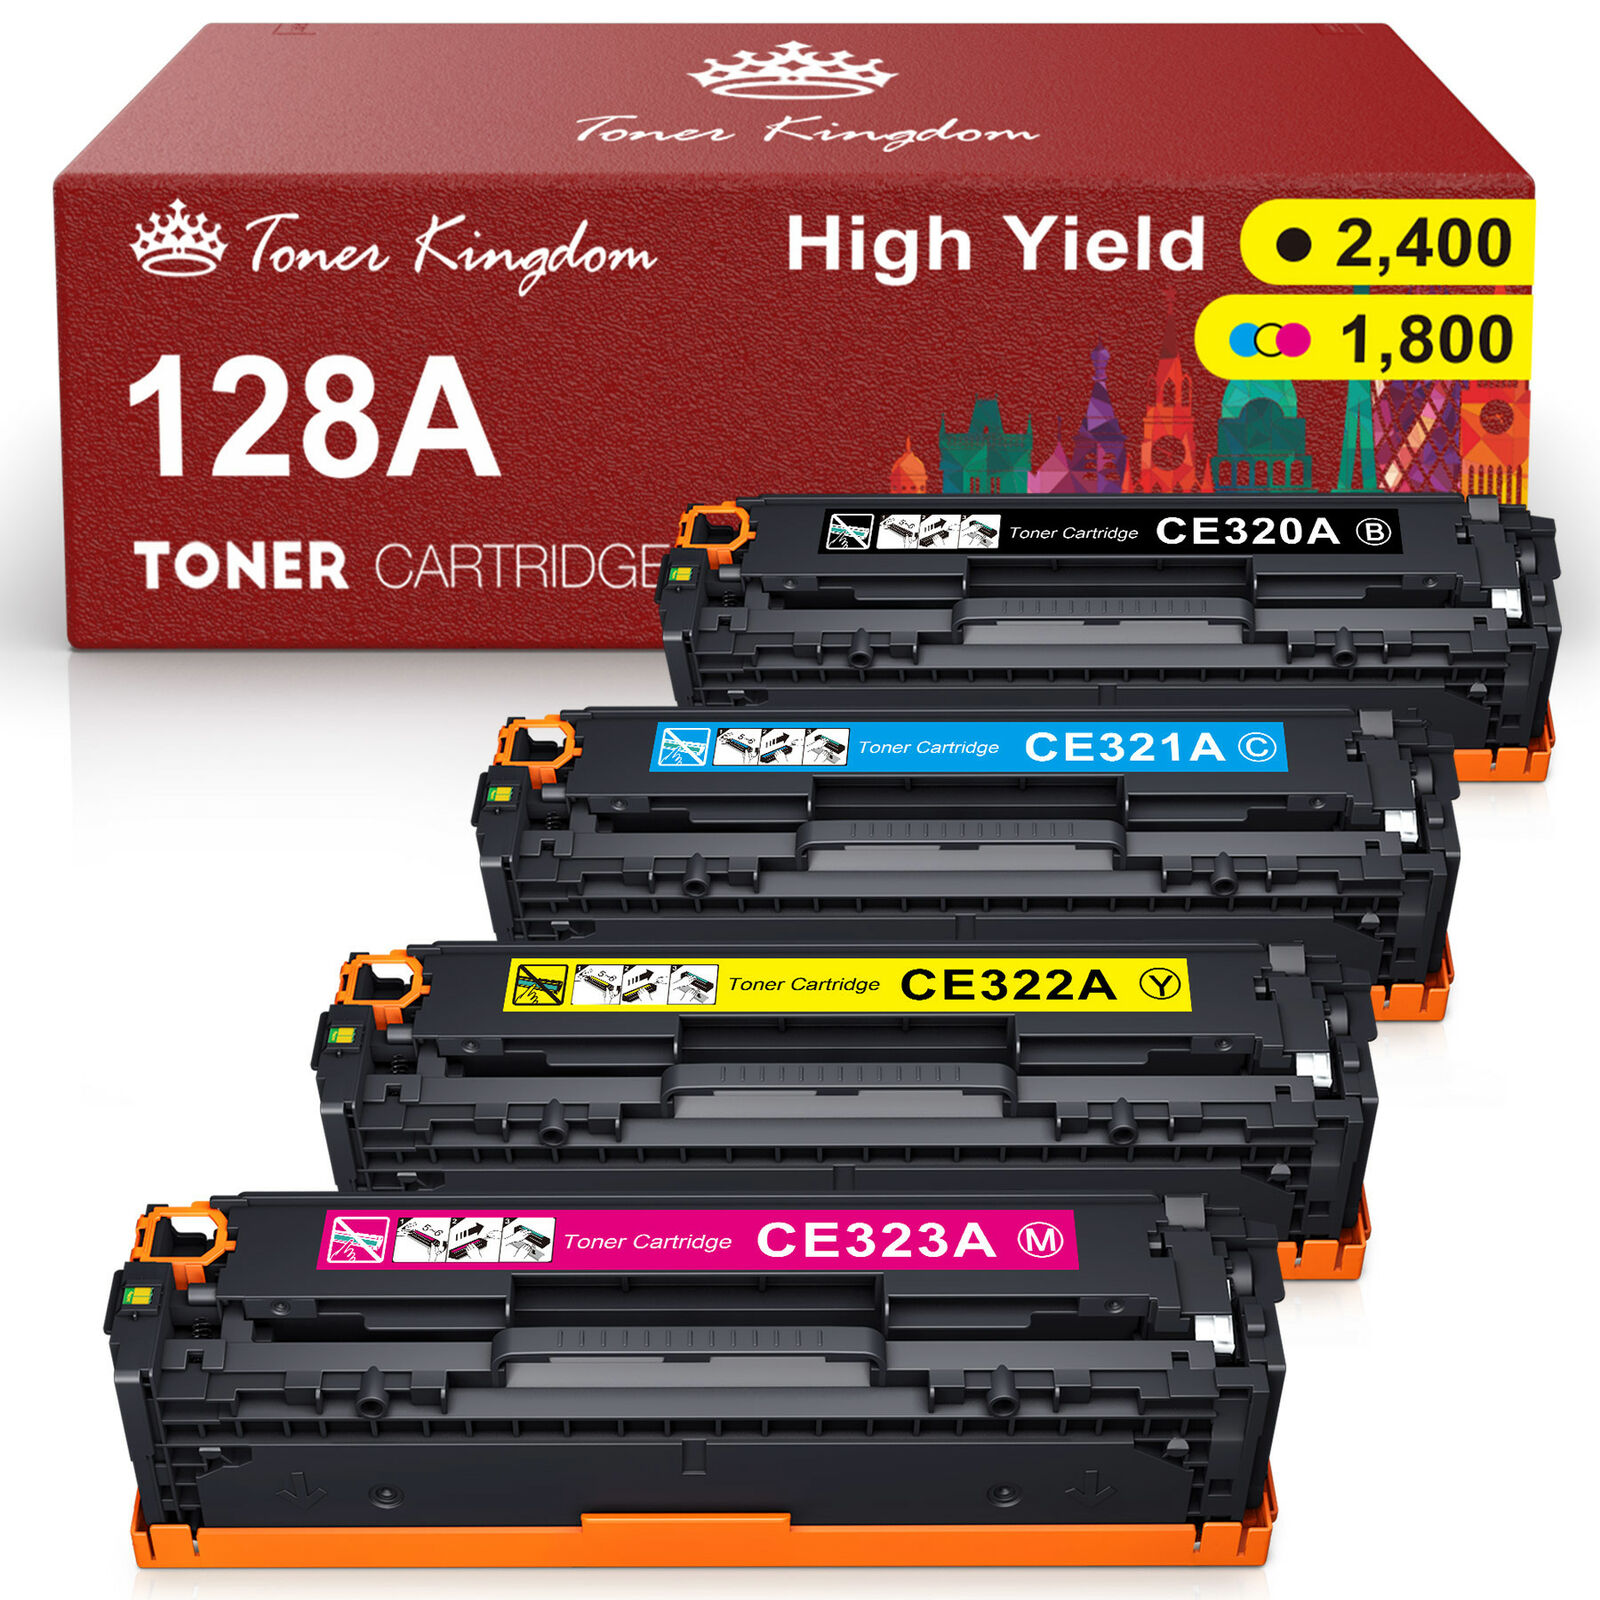 4x CE320A Compatible with HP 128A Toner LaserJet Pro CM1415fnw CP1525nw CP1525n